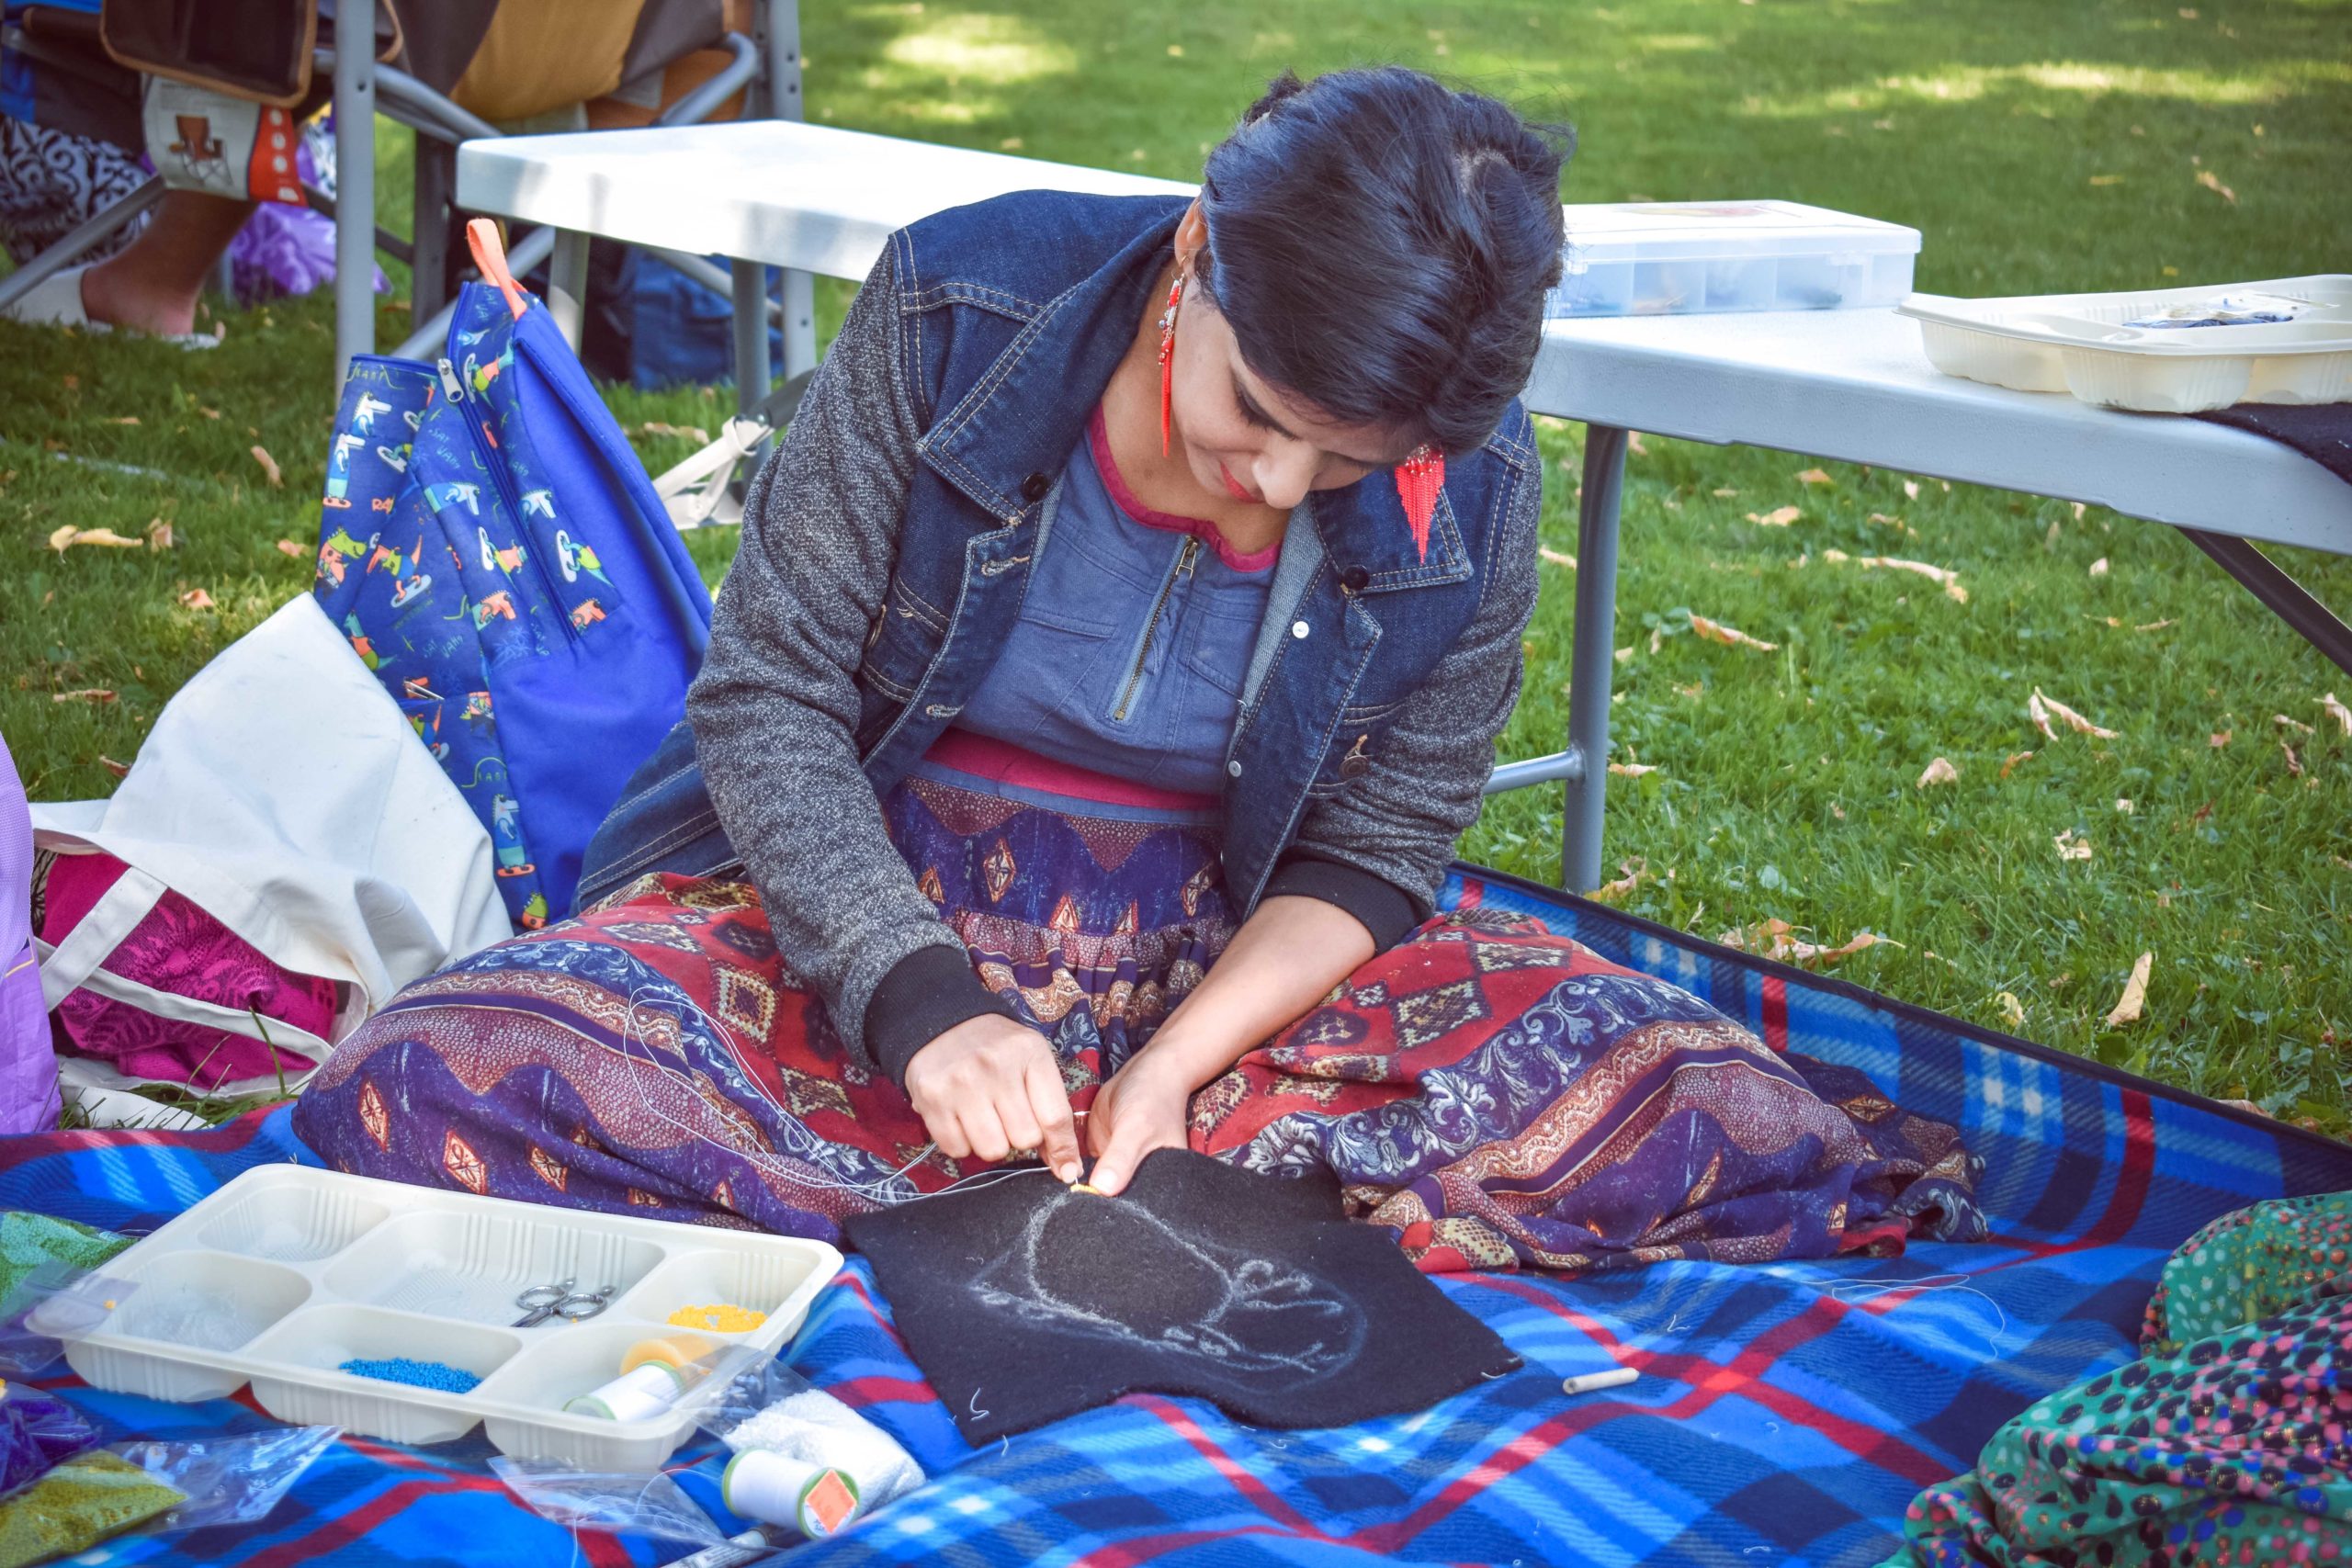 photo of a participant working on a beaded artwork, sitting on a blue picnic blanket. There are bags and trays with beads, a bench and table behind them